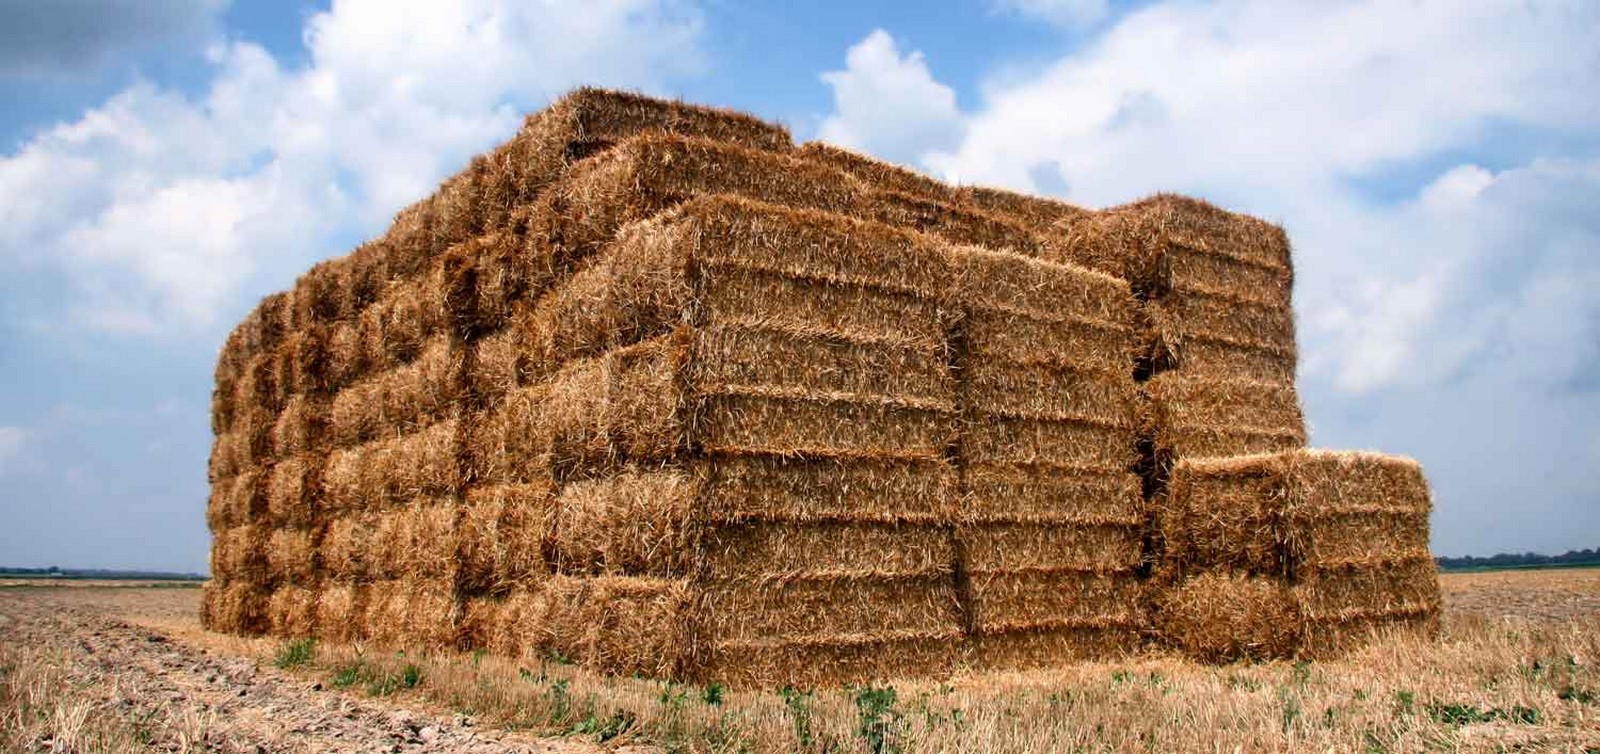 10 Sustainable Materials Every Architect Must Know -Straw bales - Sheet1